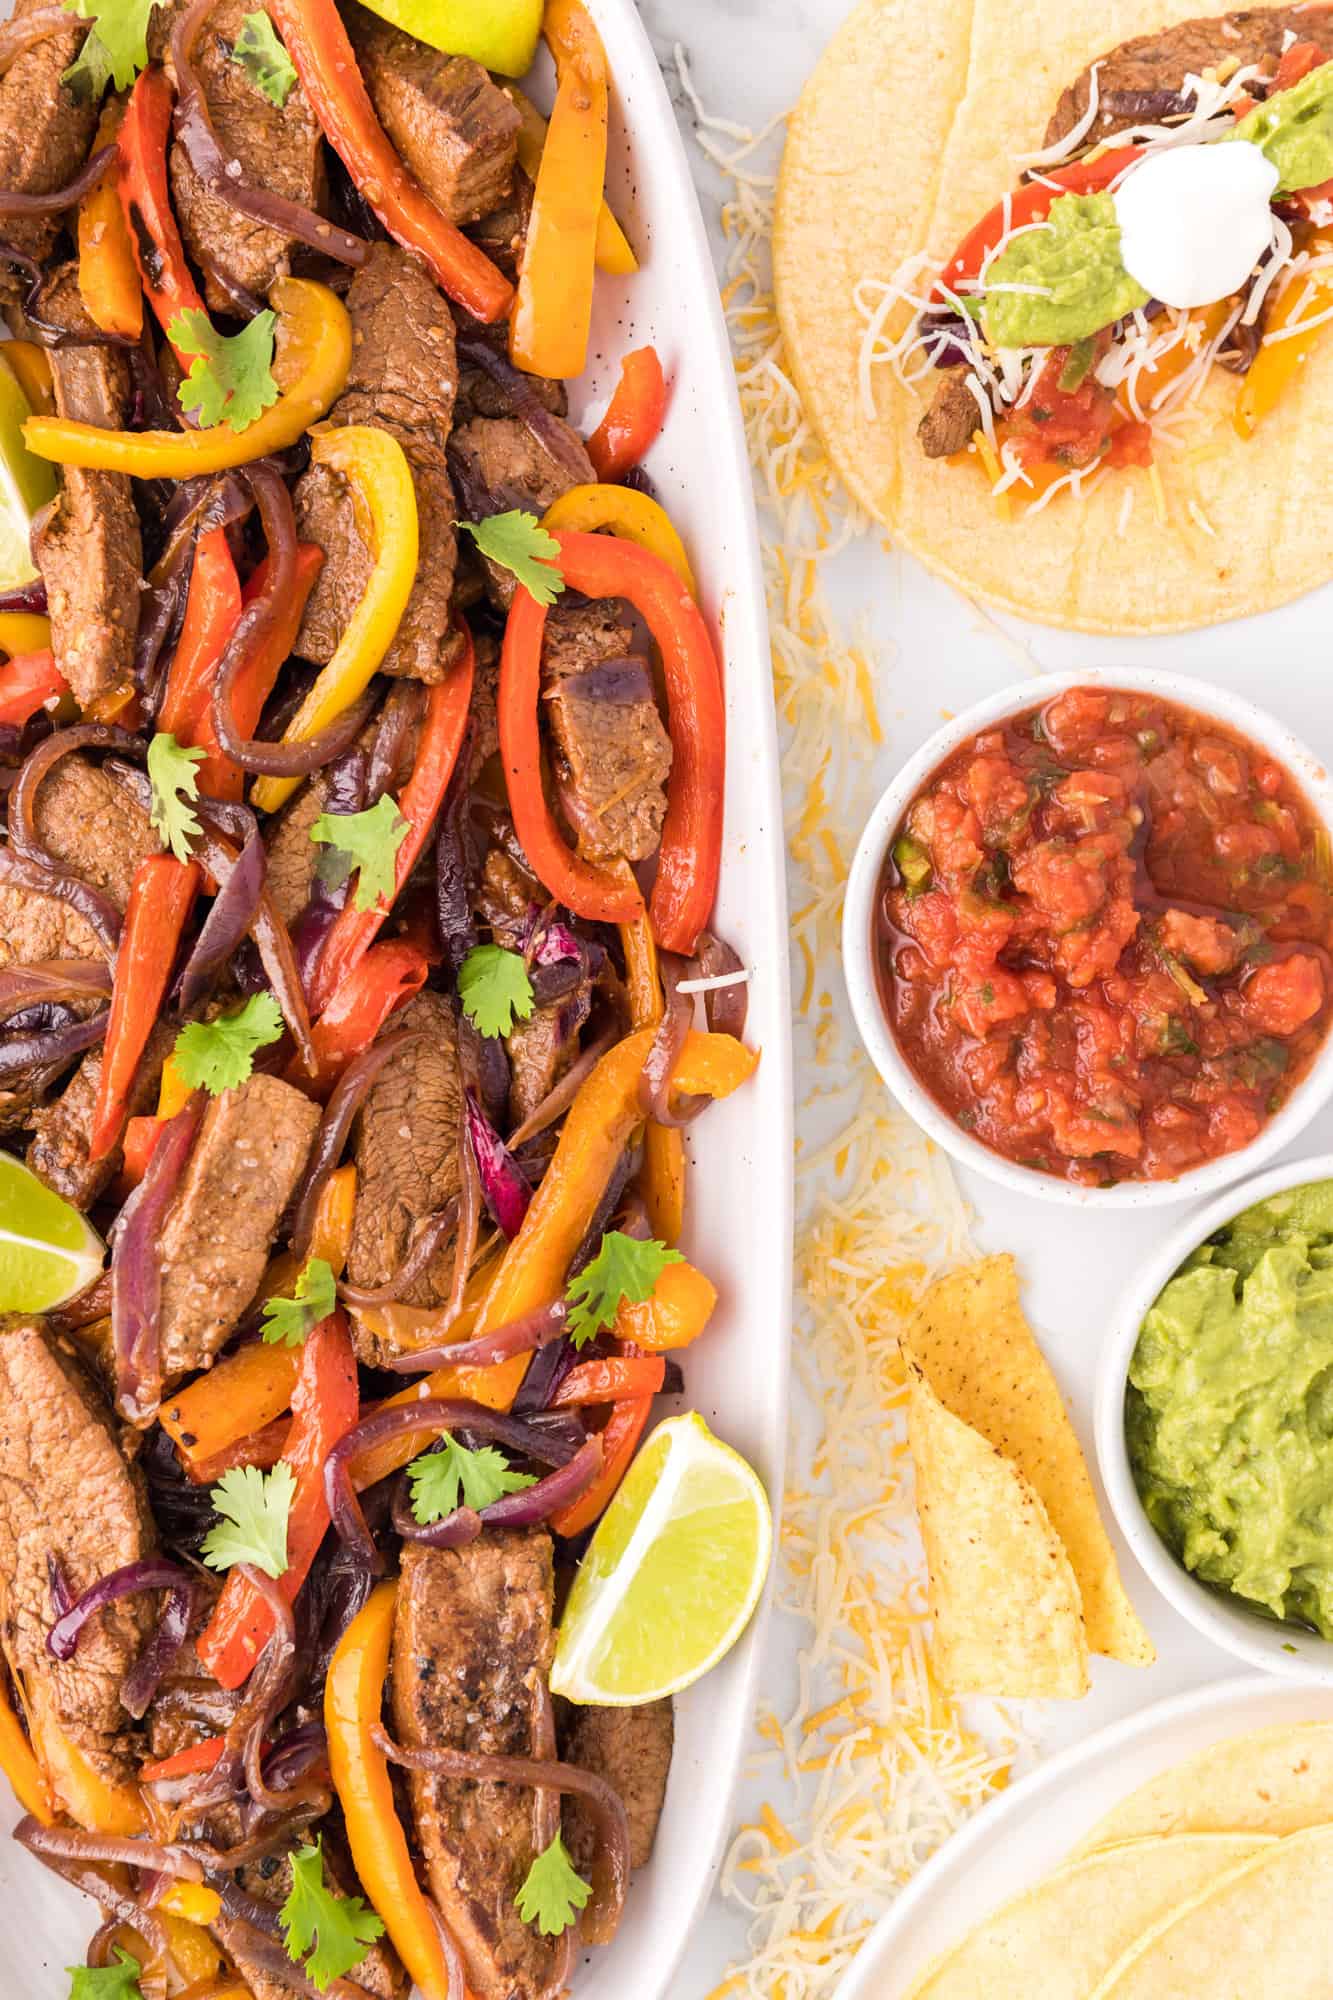 Overhead view of steak fajitas in a long serving dish, topped with lime wedges and cilantro, next to bowls of toppings and steak fajitas served over a tortilla on a plate.